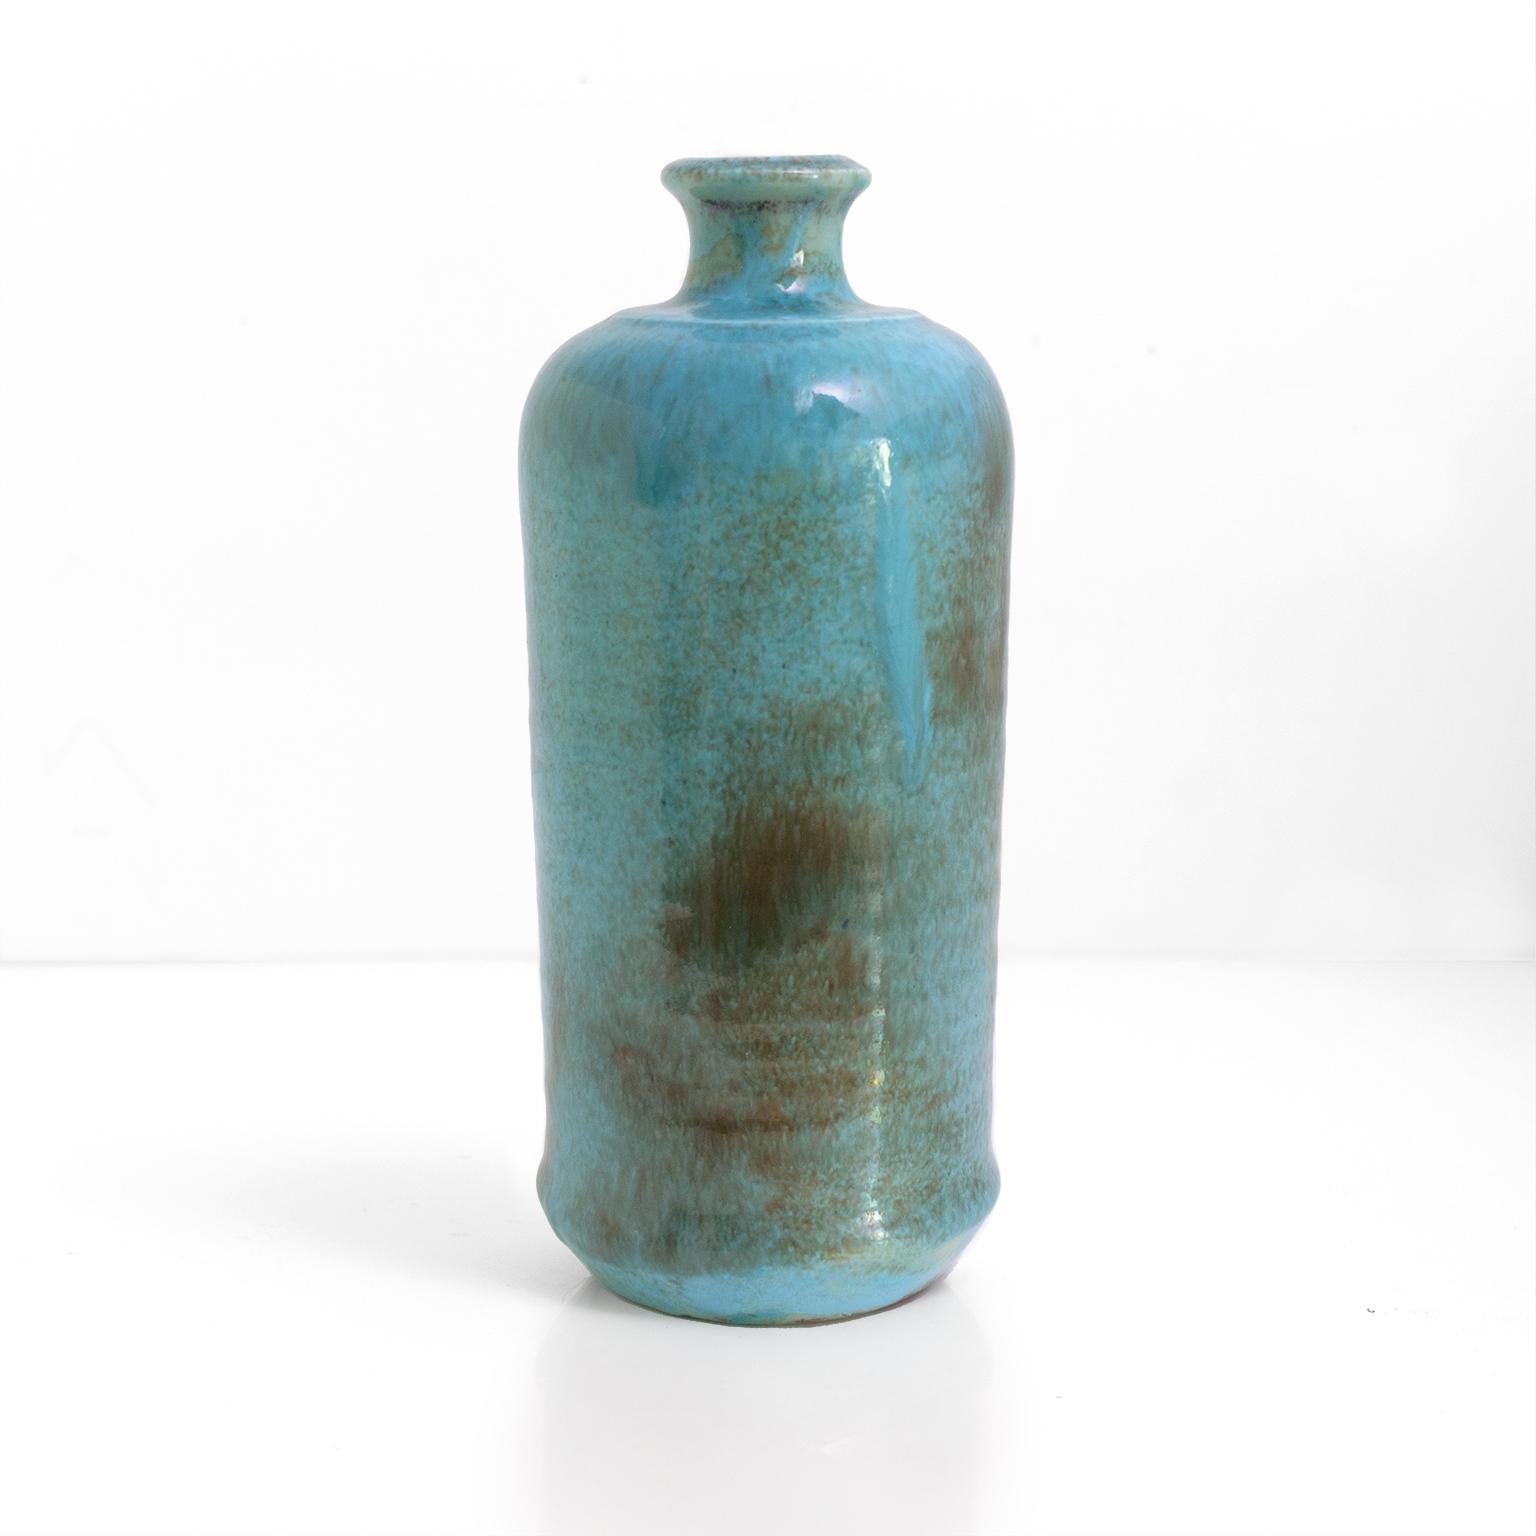 Valentina Modig-Manuel created turquoise ceramic bud vase, from 1952, produced at Studio Keramos, Finland, signed “WC 52’ .

Measures: Height: 8.5” Diameter: 4”.